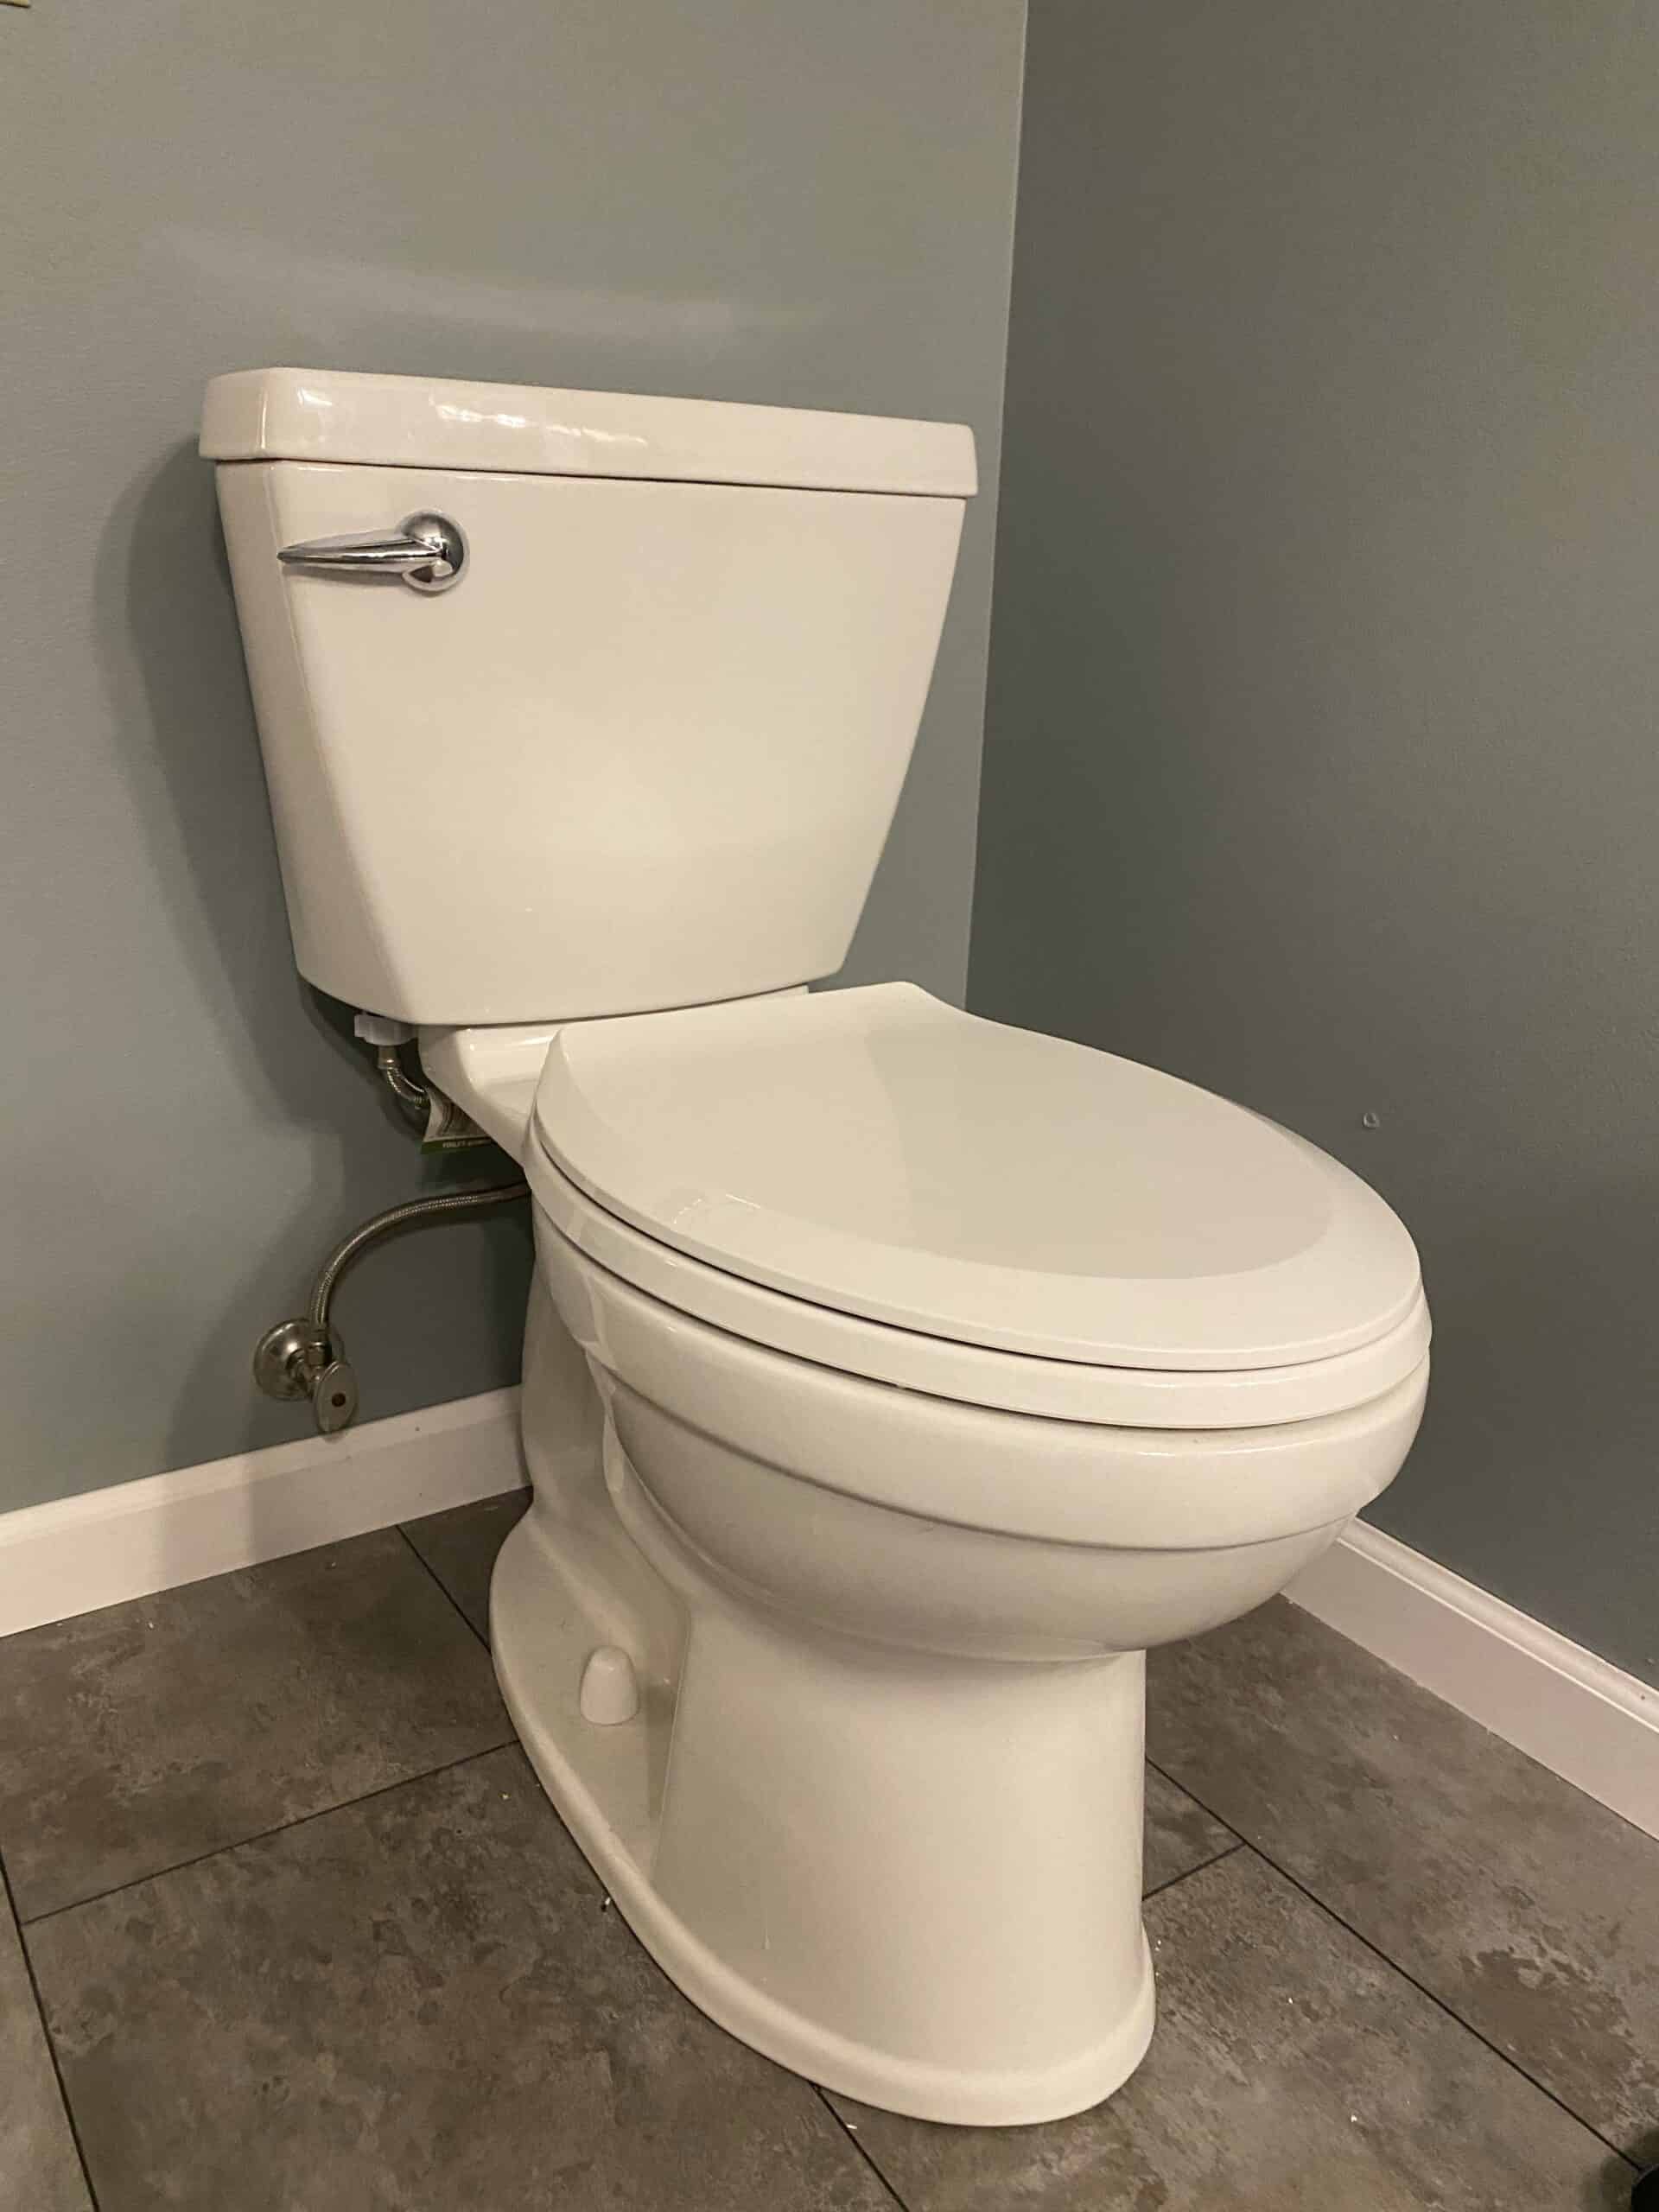 Replacing a toilet – it’s easier than you think